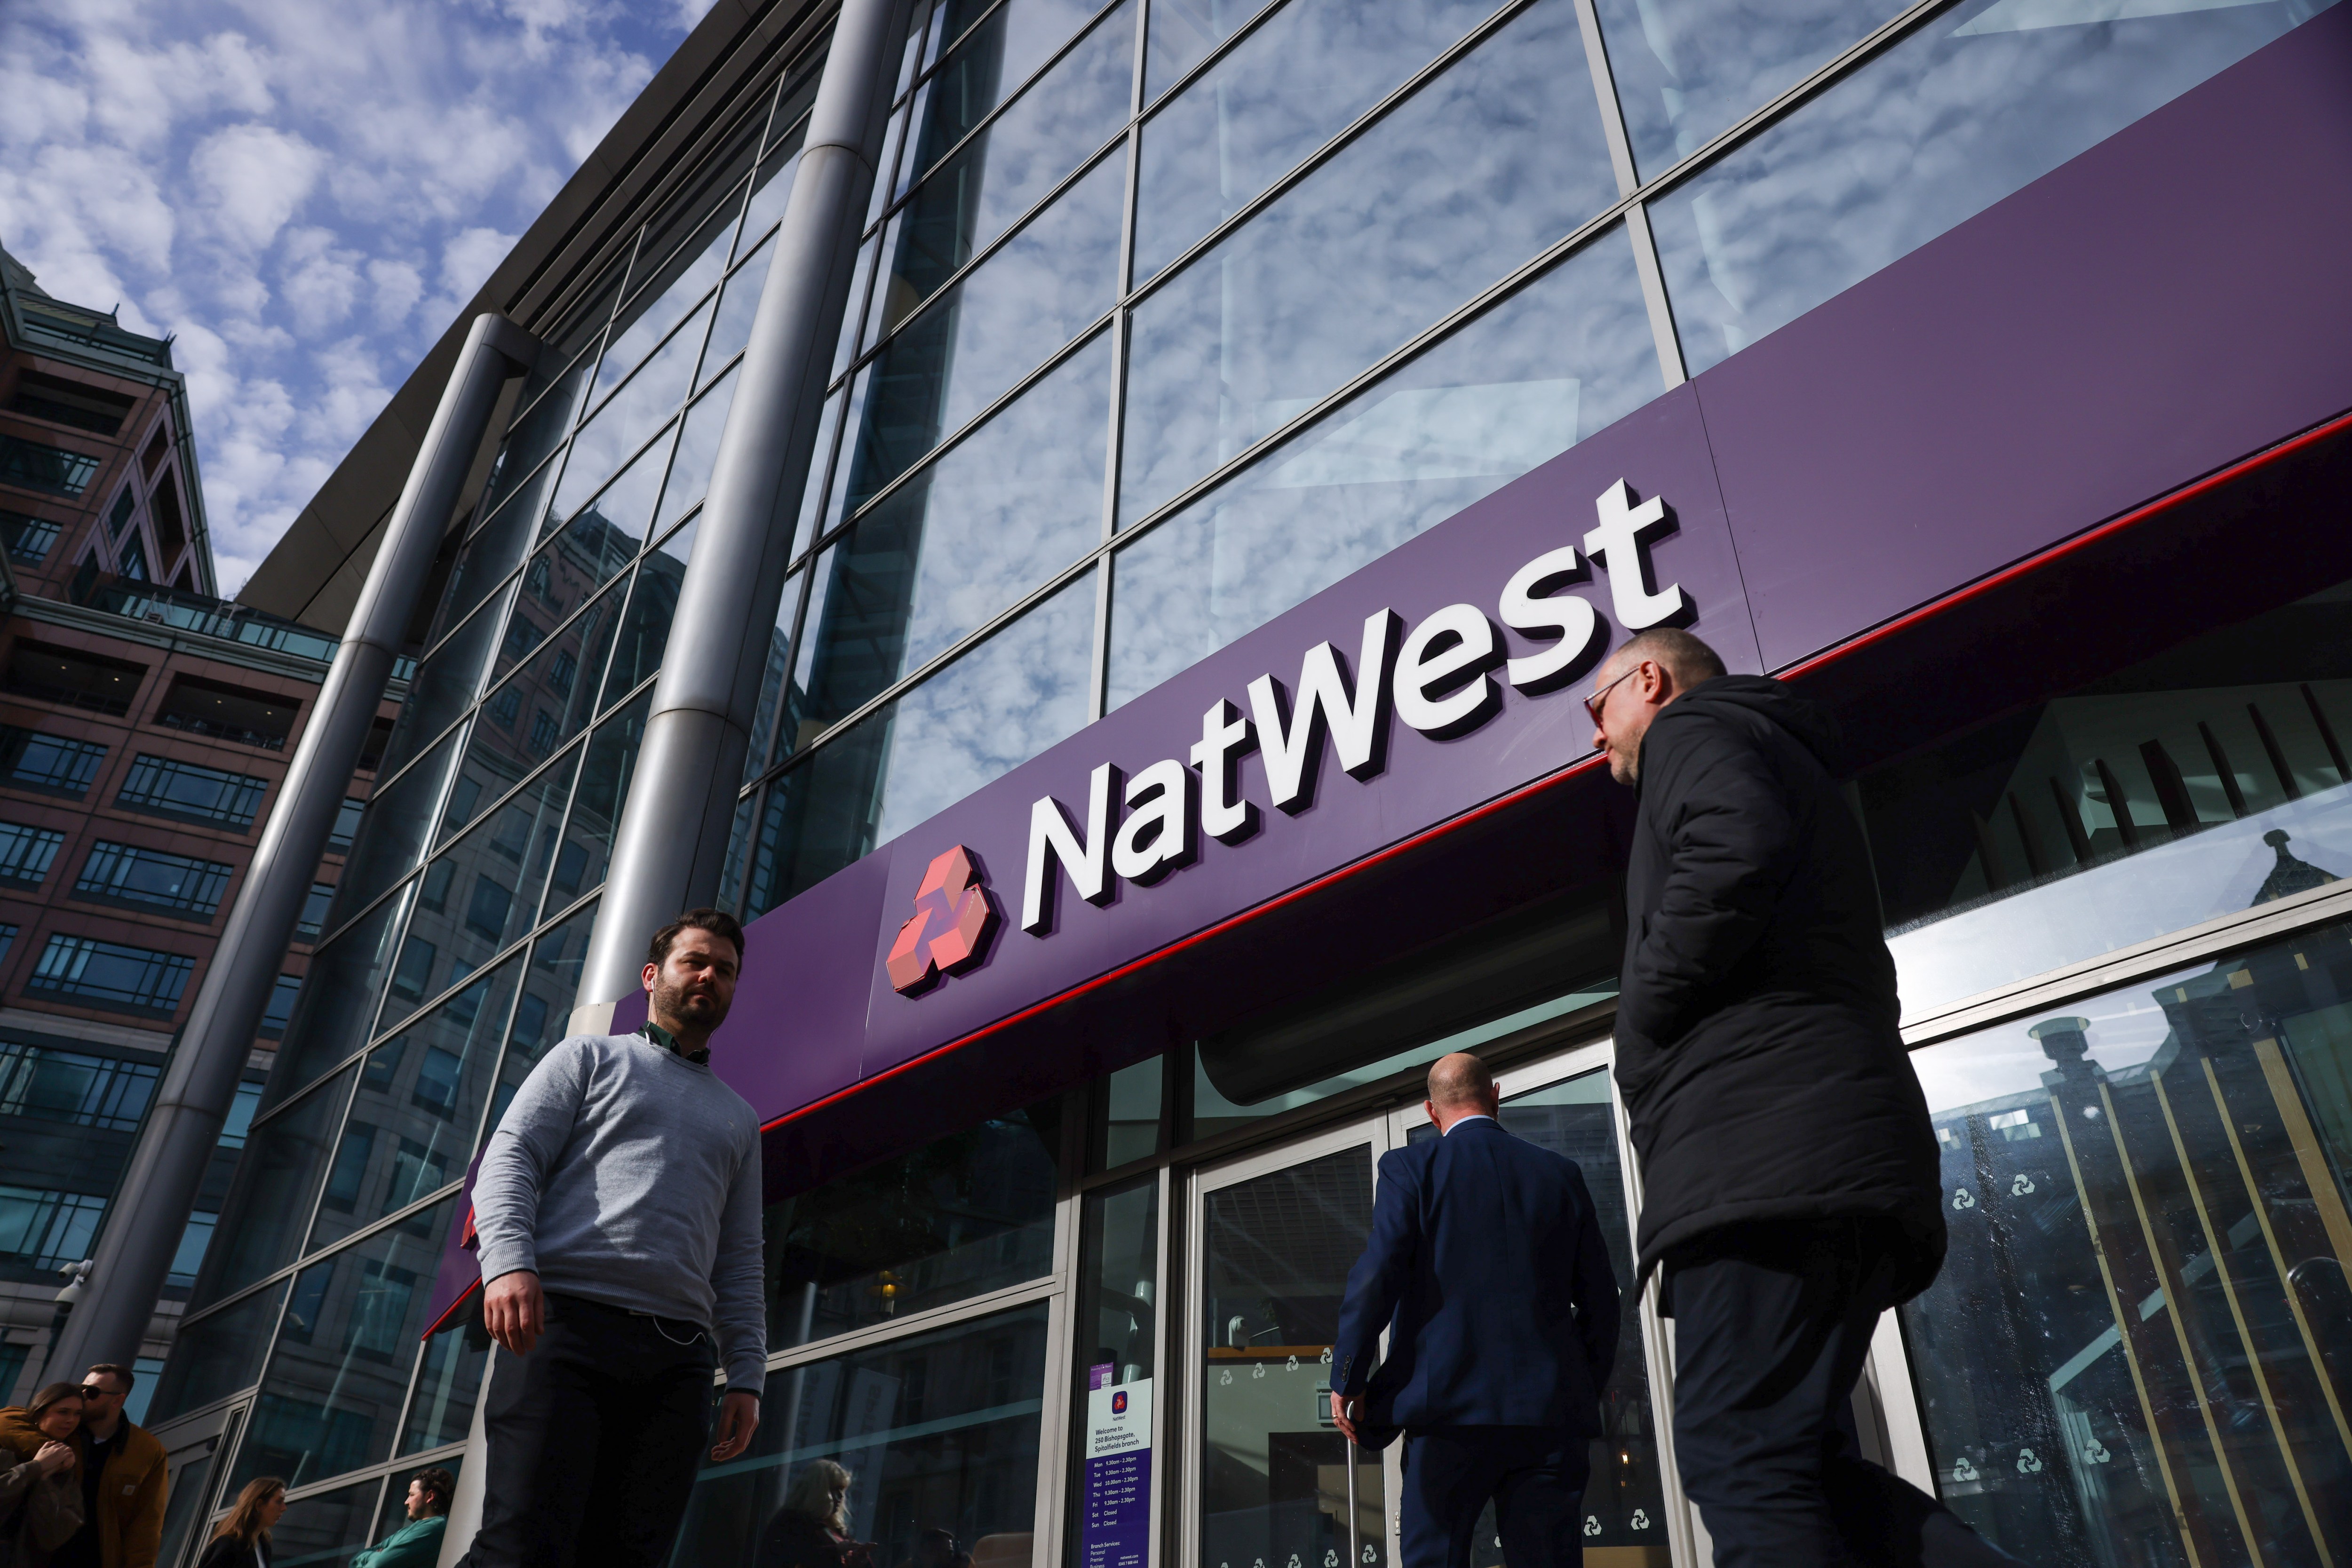 The taxpayer became NatWest’s biggest shareholder when the government rescued the lender, then known as Royal Bank of Scotland, during the financial crisis of 2007-9